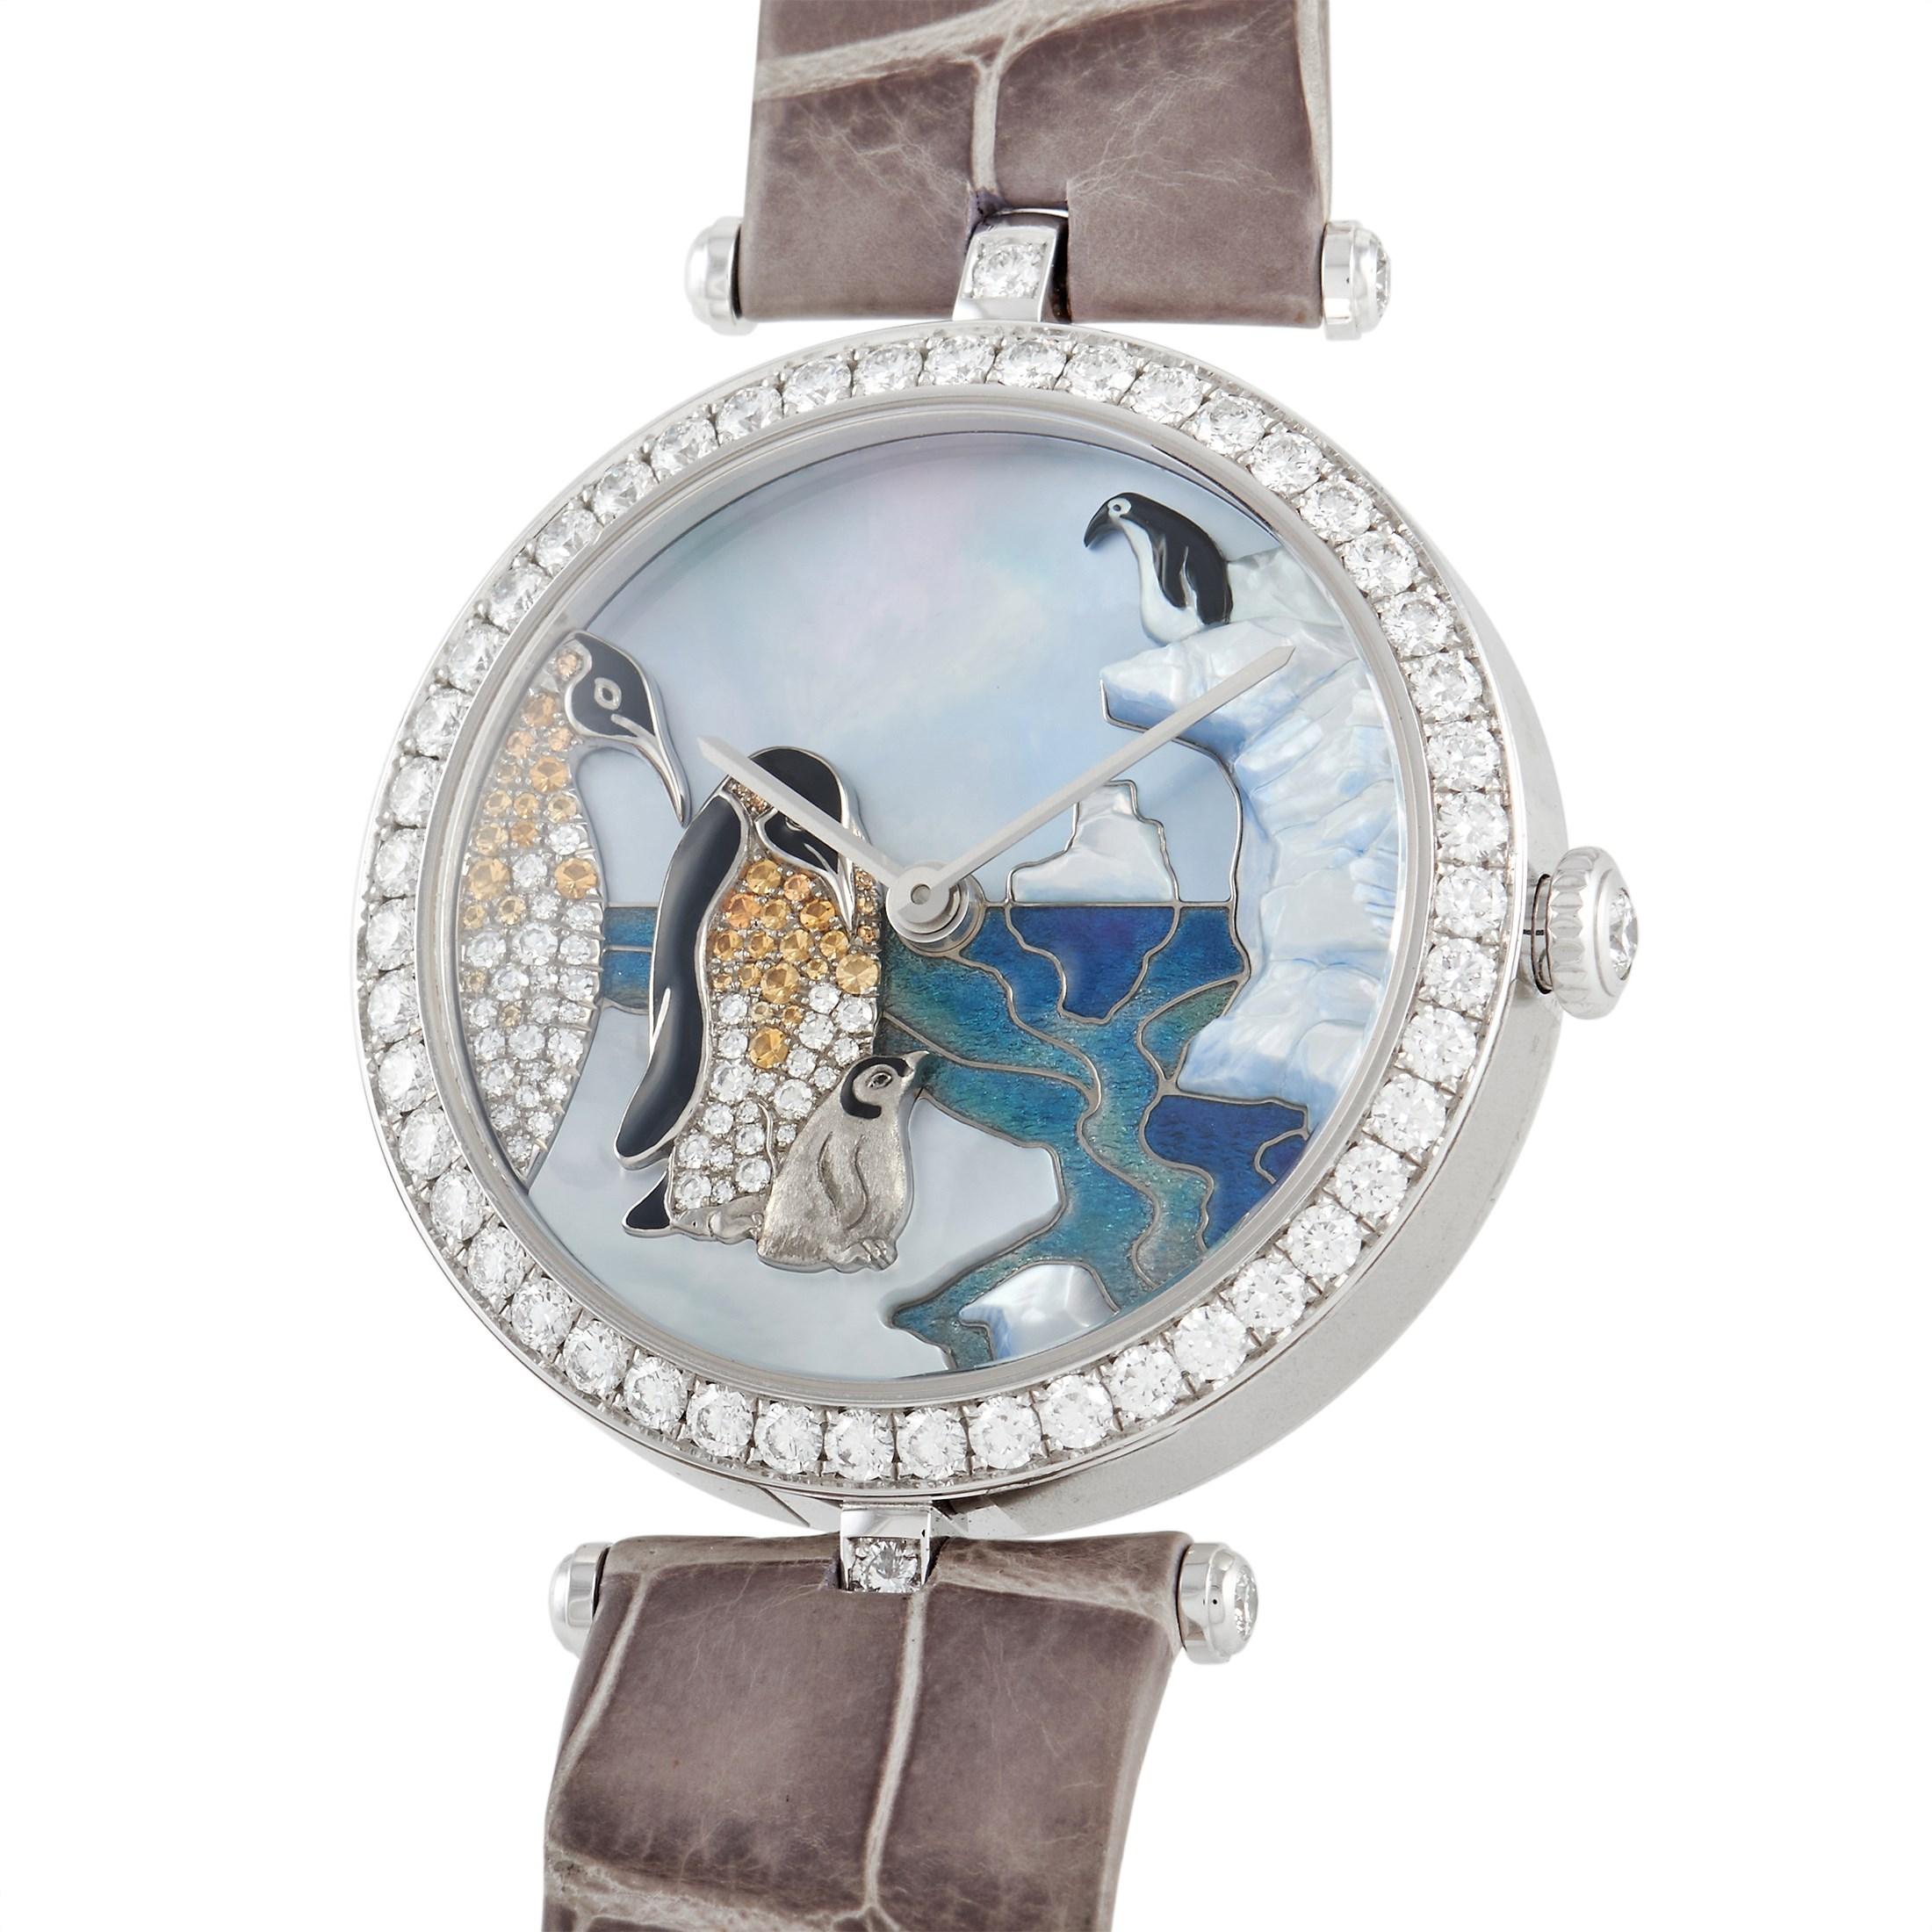 From circa 2011, this Van Cleef & Arpels Poetic Polar Landscape Penguin Ladies Watch HH35319 features an extraordinary dial. Set with a numberless Mother of Pearl dial background is a penguin landscape in enamel with diamond accents. Silver-tone